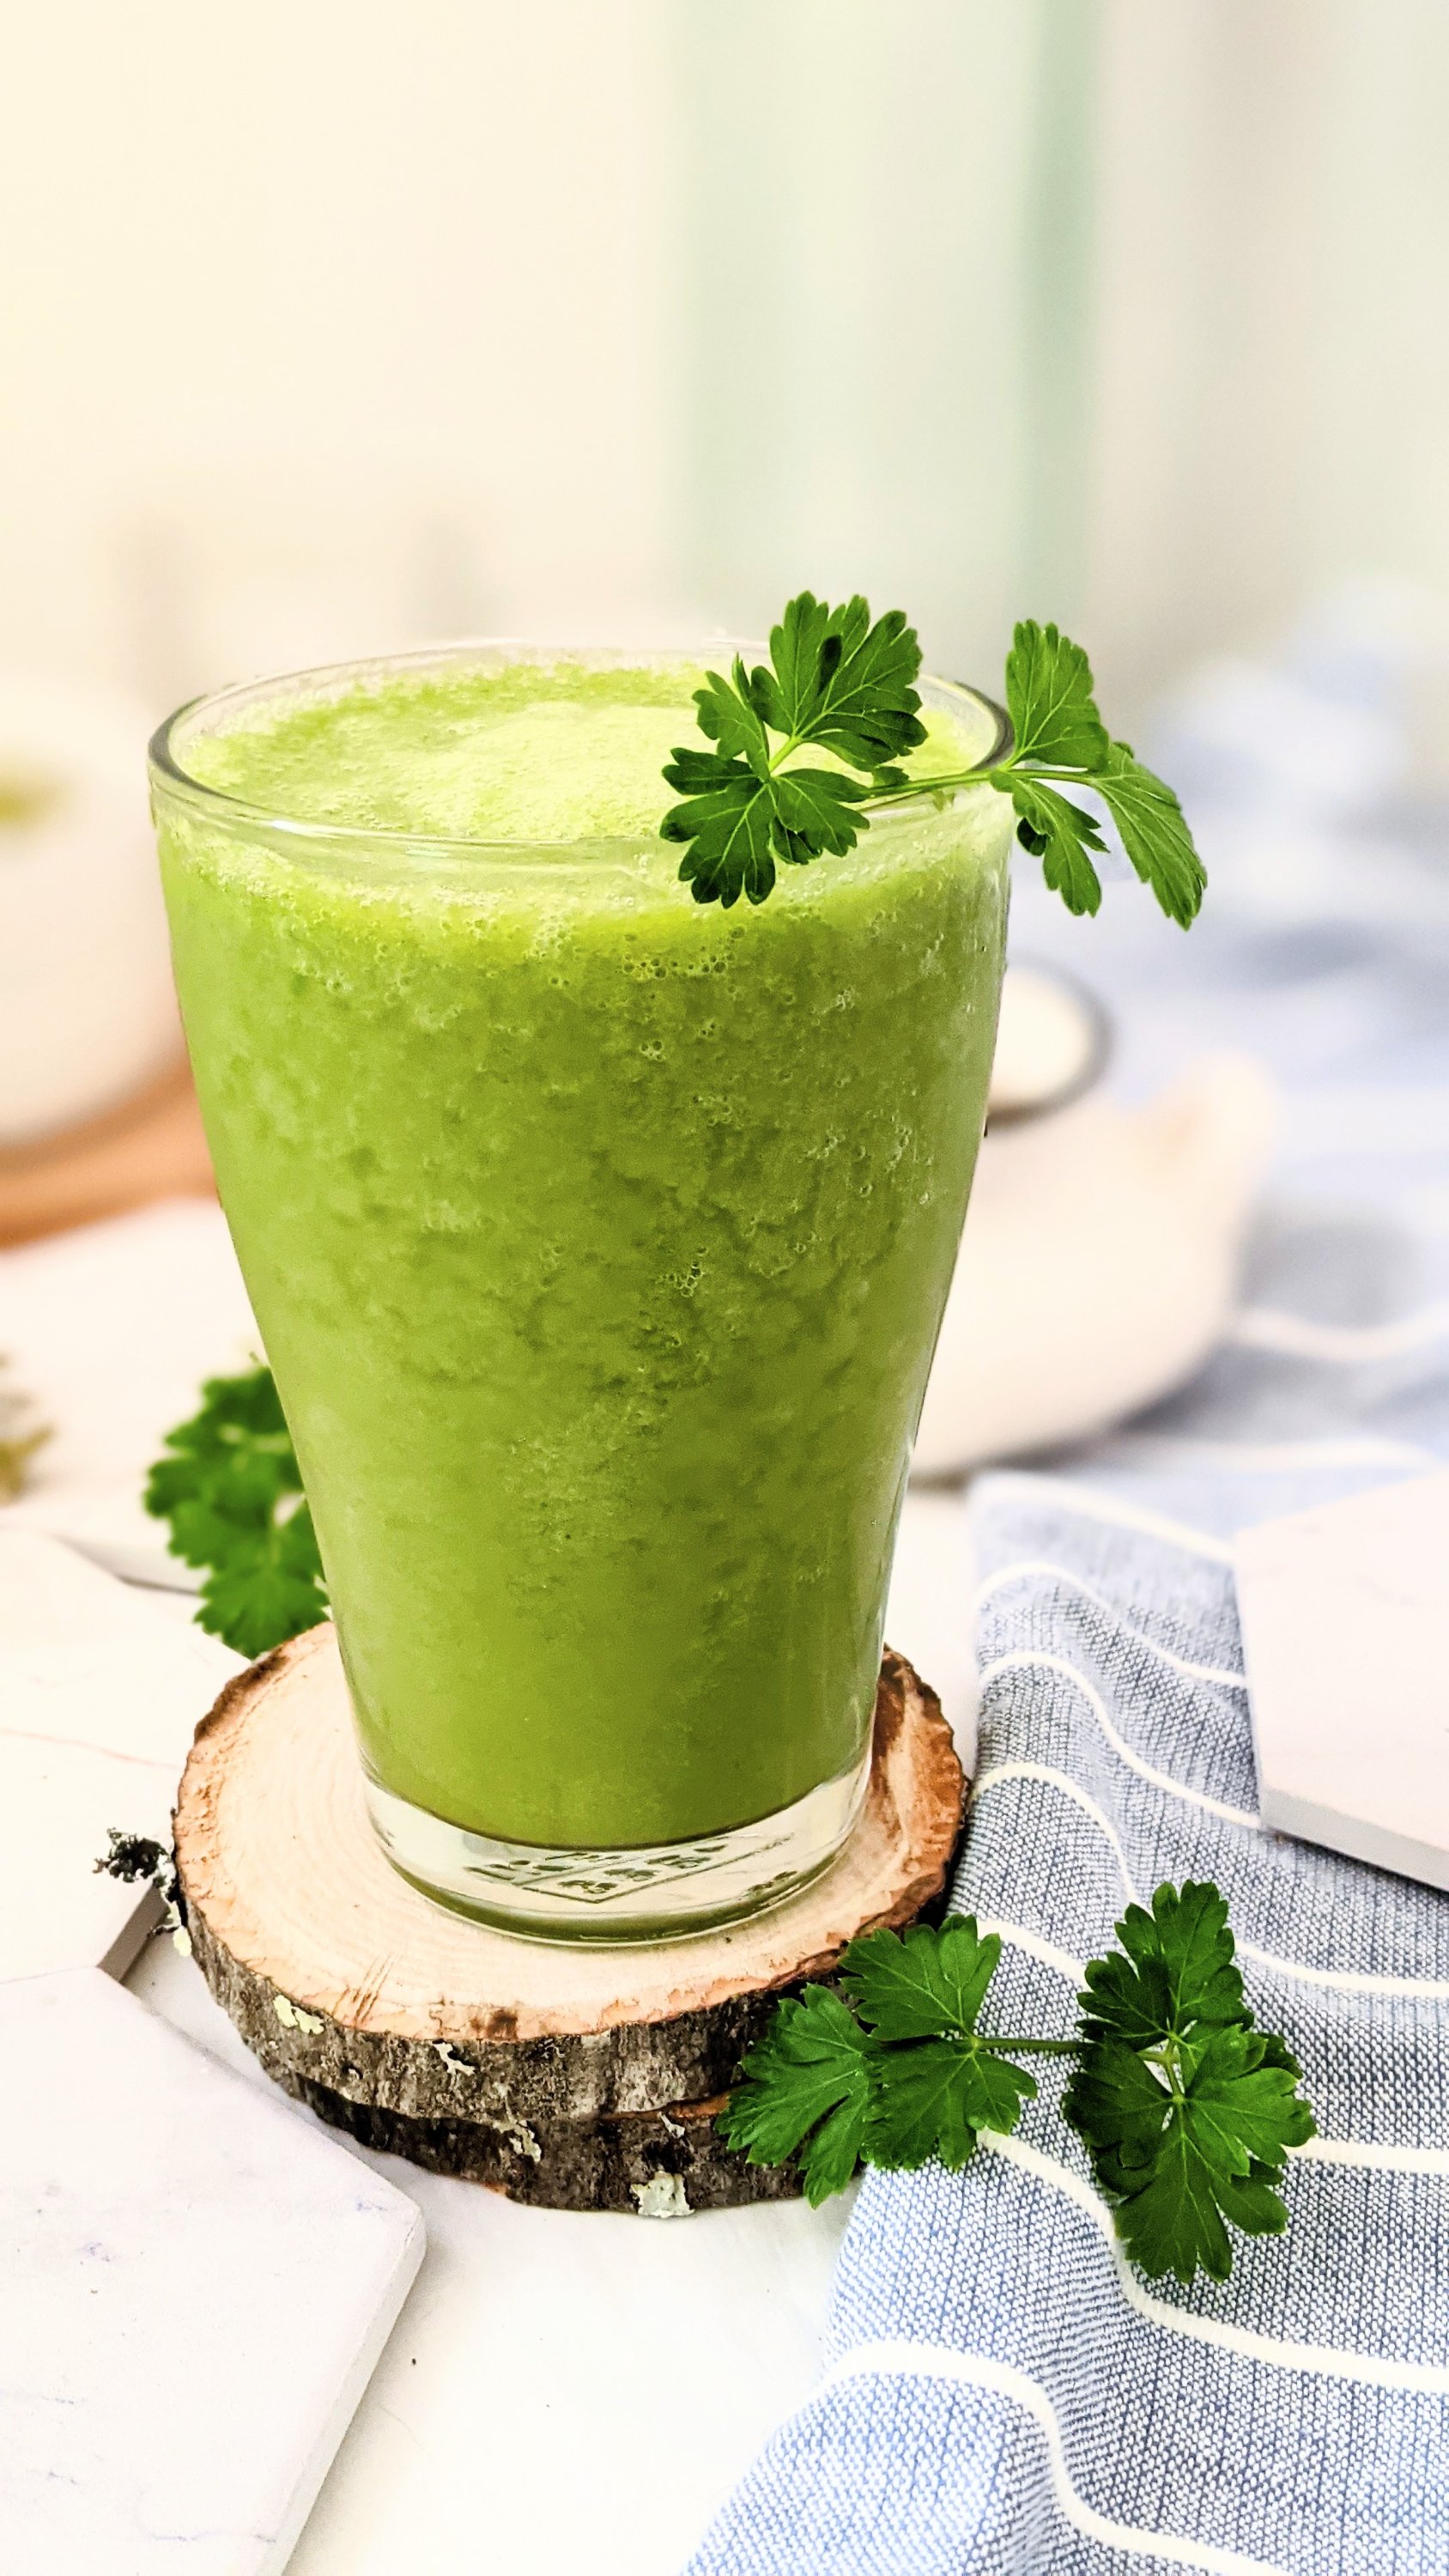 raw vegan parsley recipes smoothies with parsley stems and leaves parsley for breakfast recipes sweet parsley recipes ways to eat more parsley